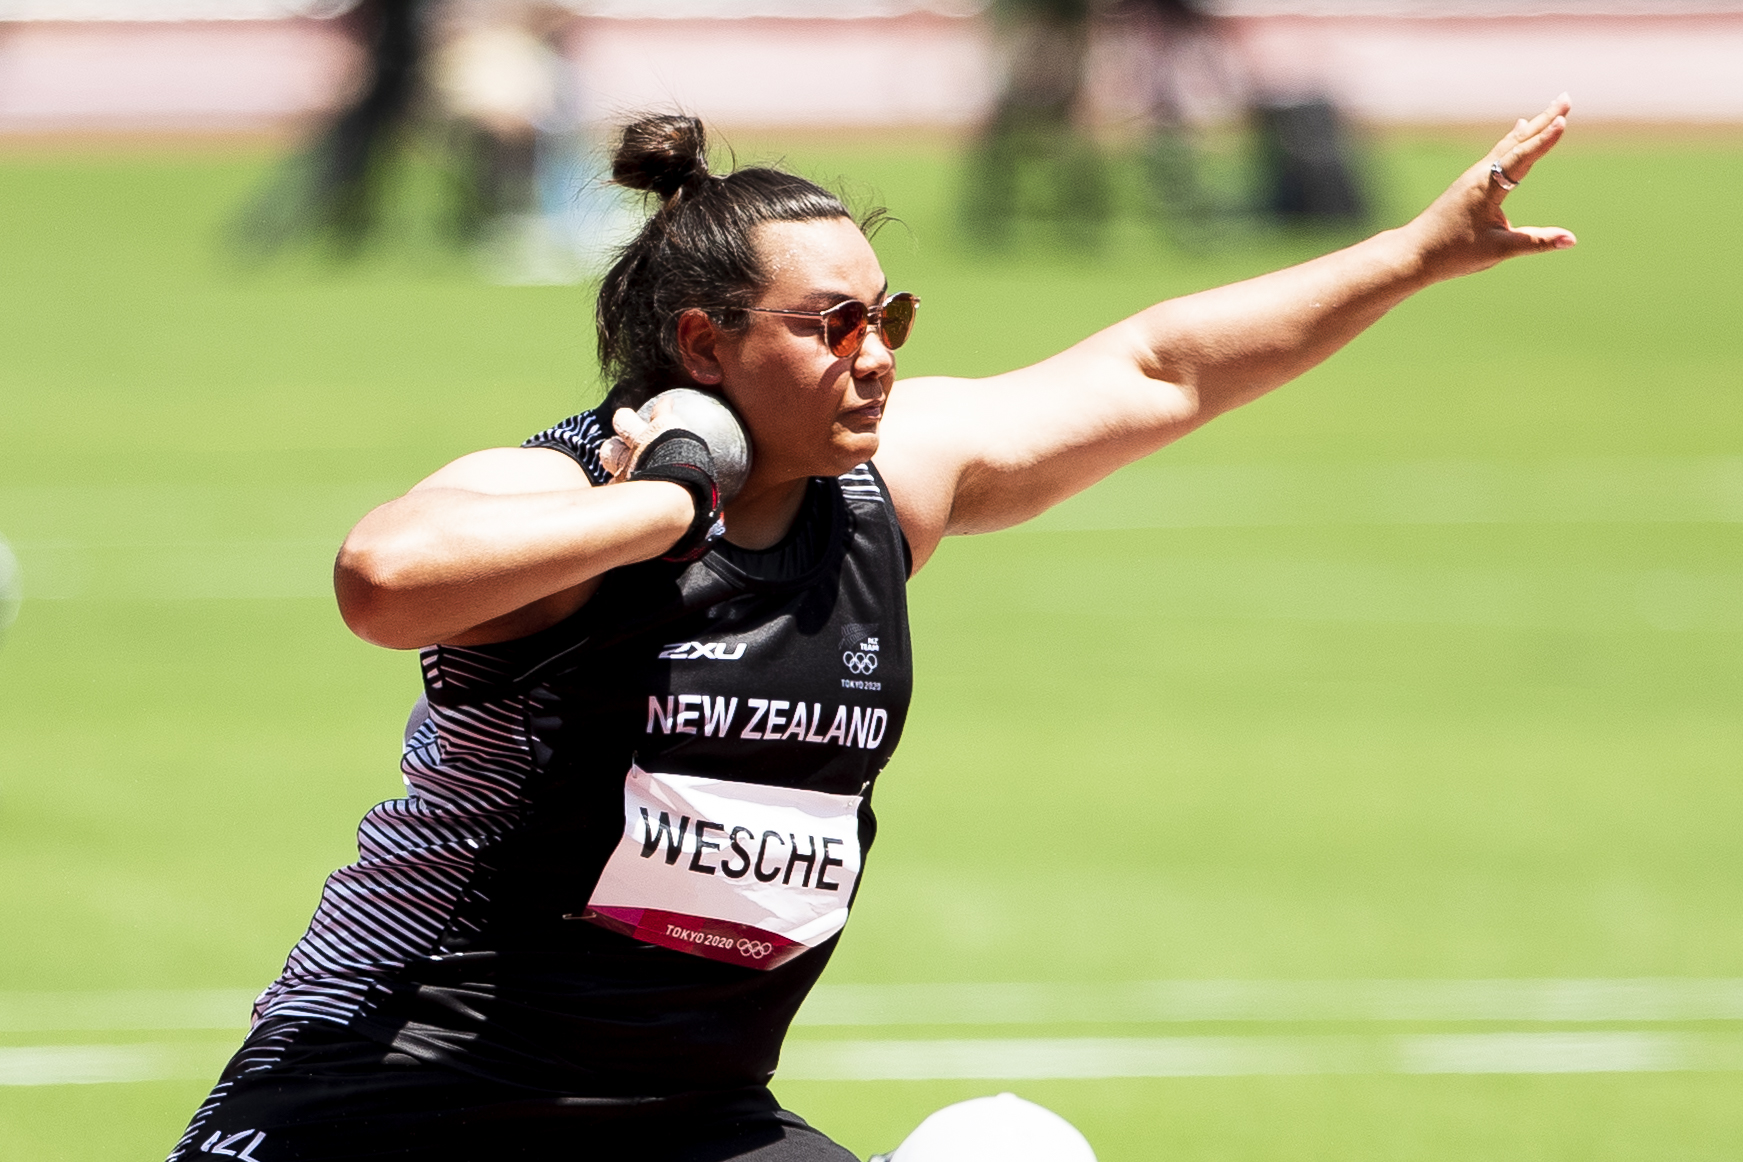 Meticulous preparation key to Maddi Wesche's breakthrough Olympic  achievement - Athletics New Zealand